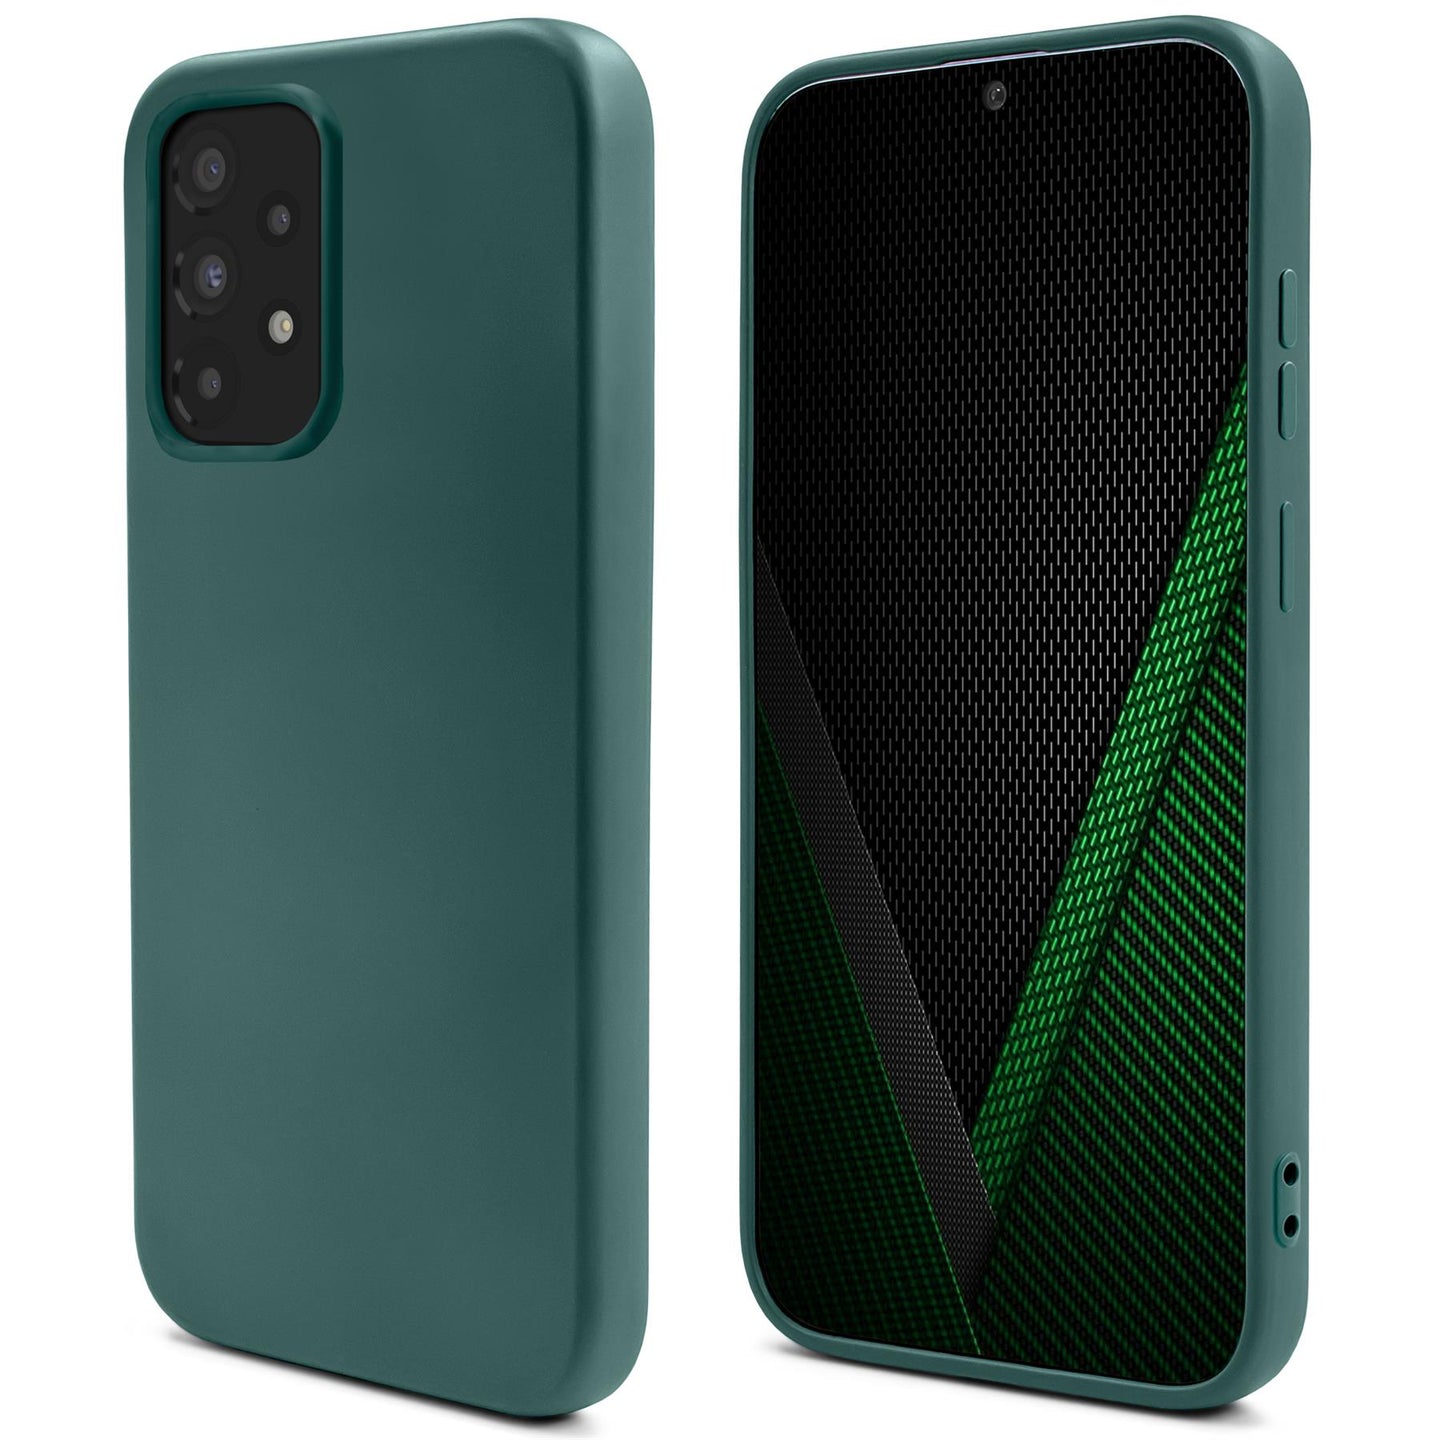 Moozy Lifestyle. Silicone Case for Samsung A53 5G, Dark Green - Liquid Silicone Lightweight Cover with Matte Finish and Soft Microfiber Lining, Premium Silicone Case